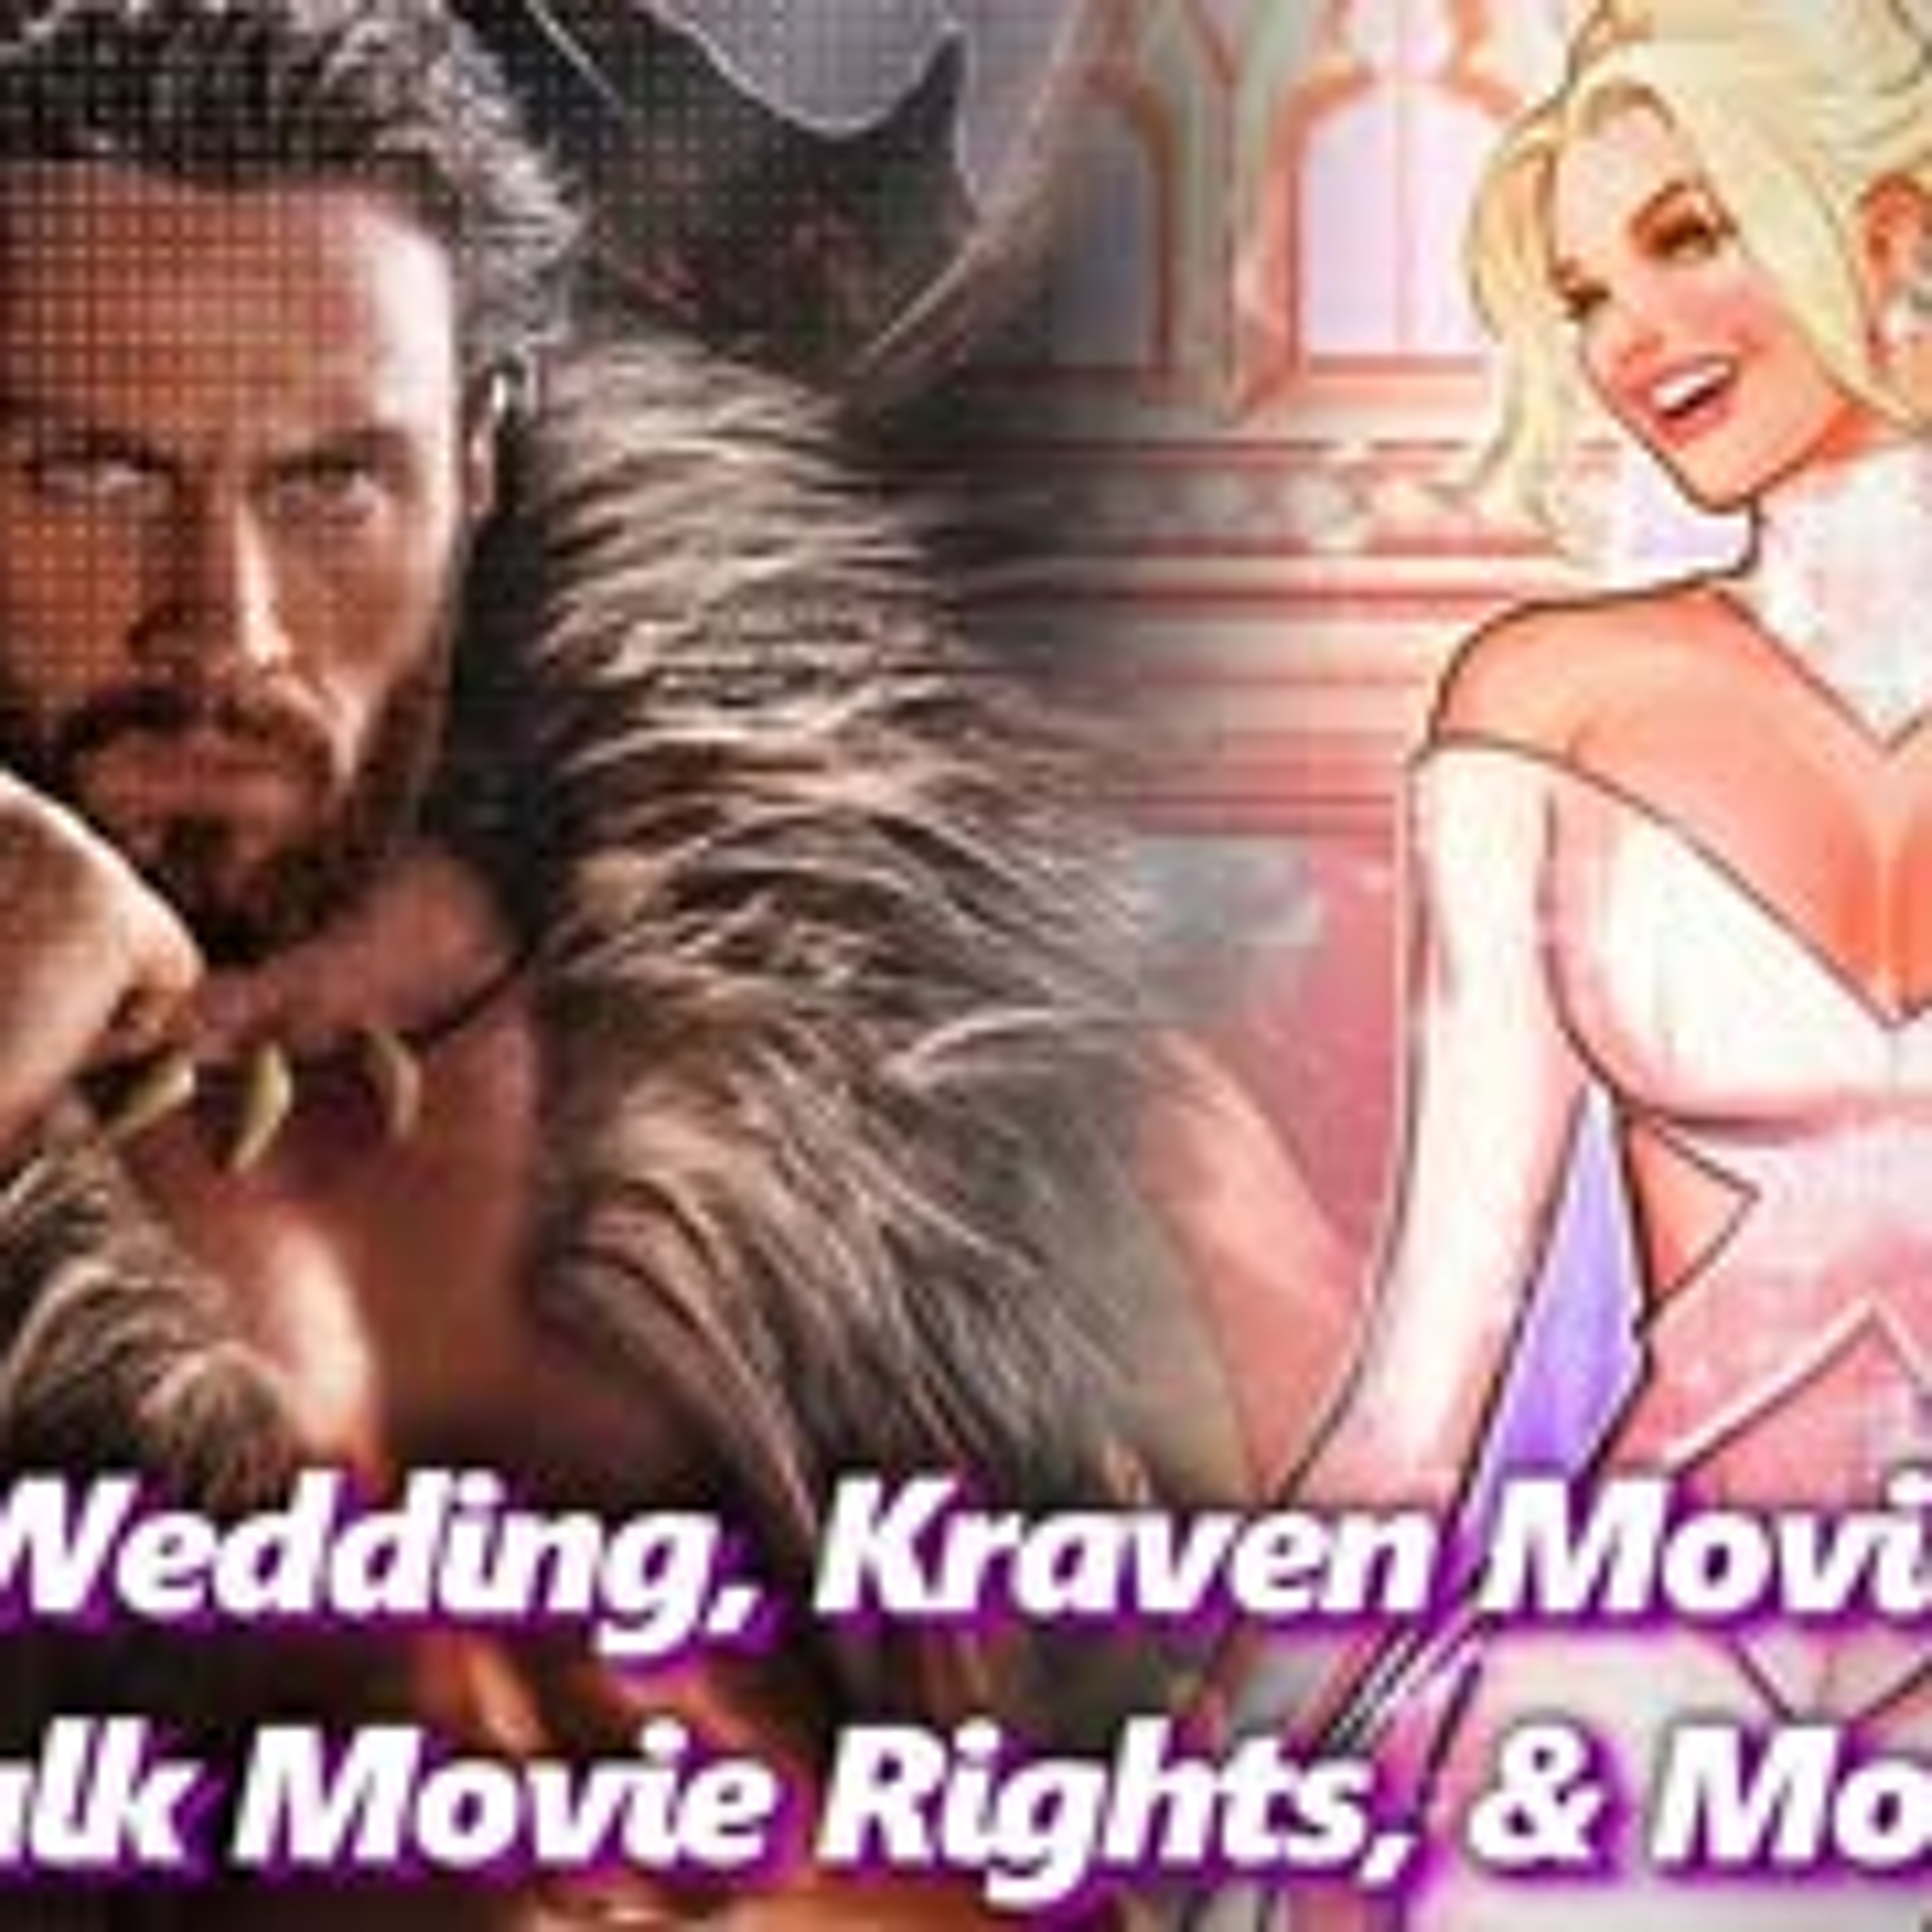 Marvel Wedding, Kraven Movie Trailer, Hulk Rights, & More! - Absolute Comics| Absolutely Marvel & DC